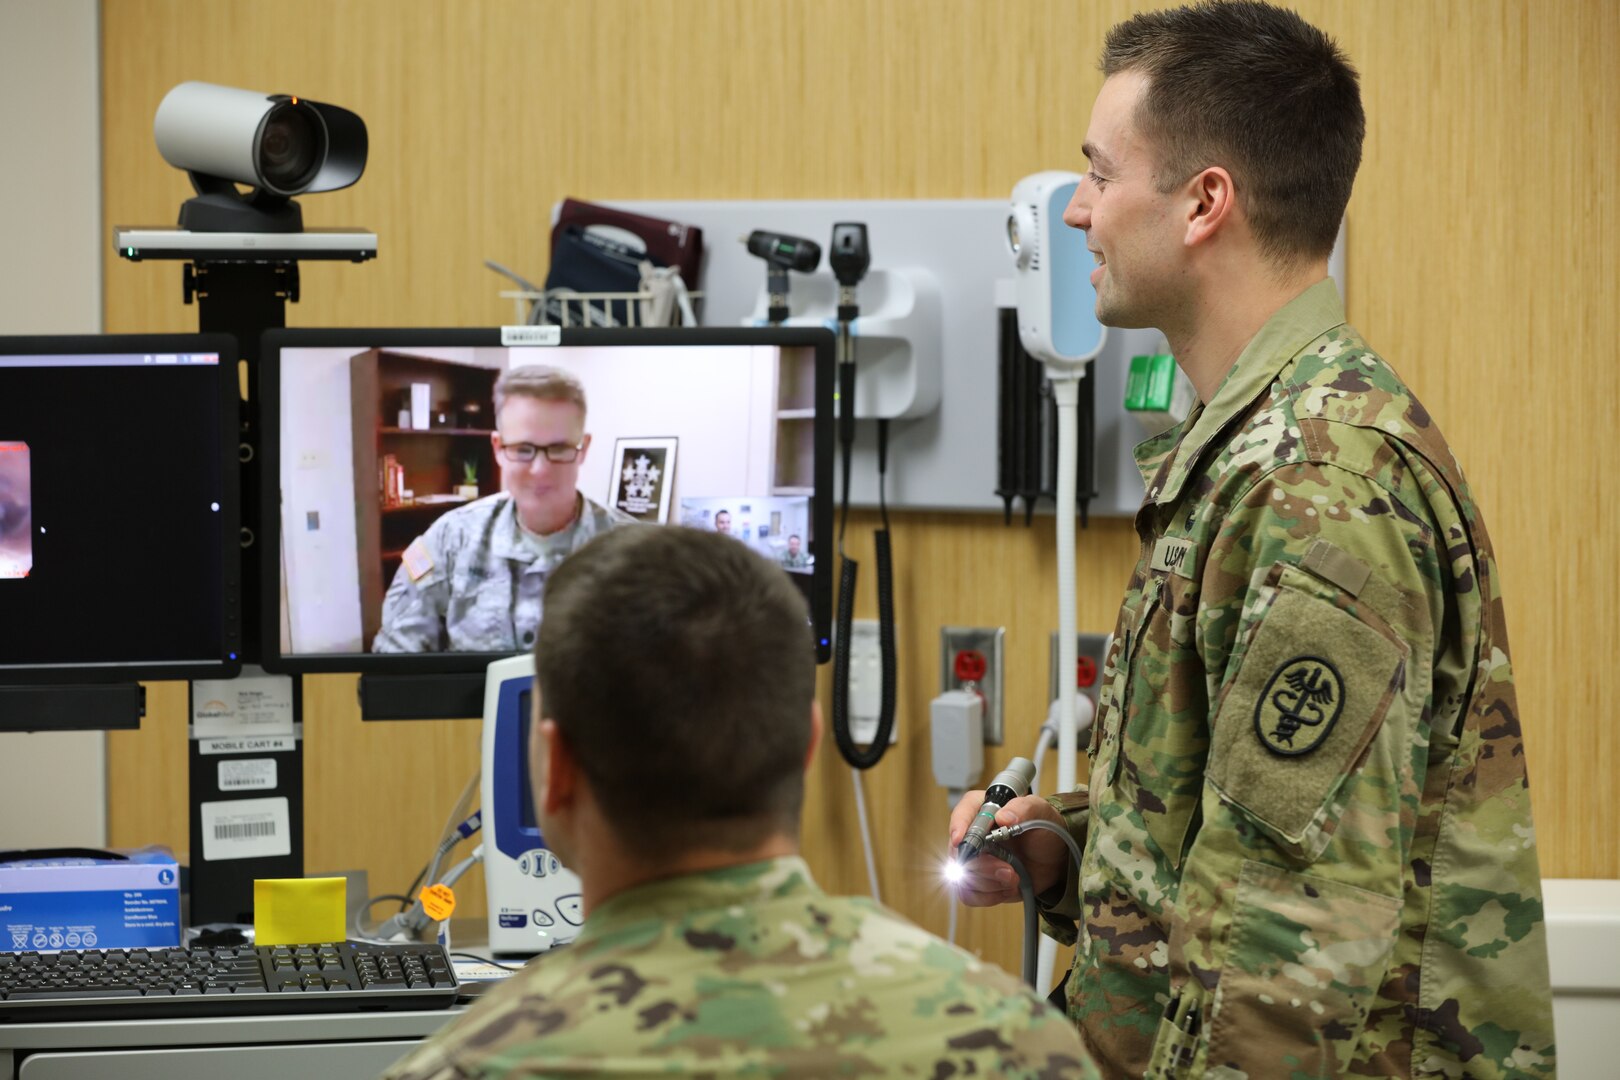 In a demonstration of the virtual health process, Lt. Col. Kevin A. Horde, a provider at Fort Gordon's Eisenhower Medical Center, offers remote consultation to mock patient Master Sgt. Jason H. Alexander with the nursing assistance of Lt. Maxx P. Mamula at Fort Campbell's Blanchfield Army Community Hospital. The Army recently opened a centralized virtual health medical center at Brooke Army Medical Center in Texas, Jan. 4, 2018.